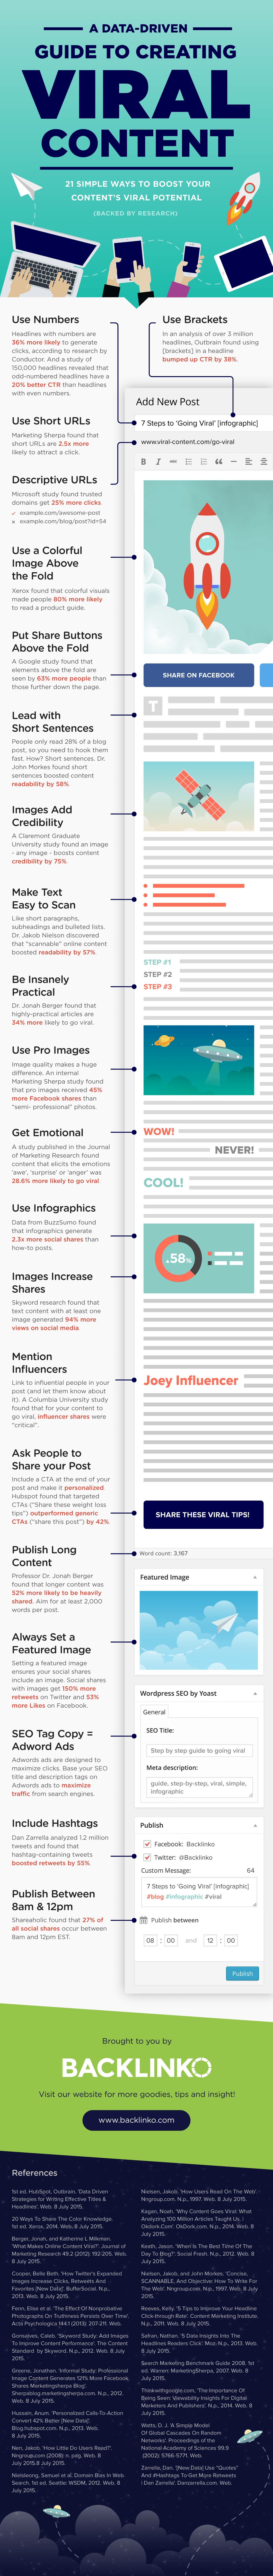 Infographic -21 Simple Ways to Boost Your Content’s Viral Potential